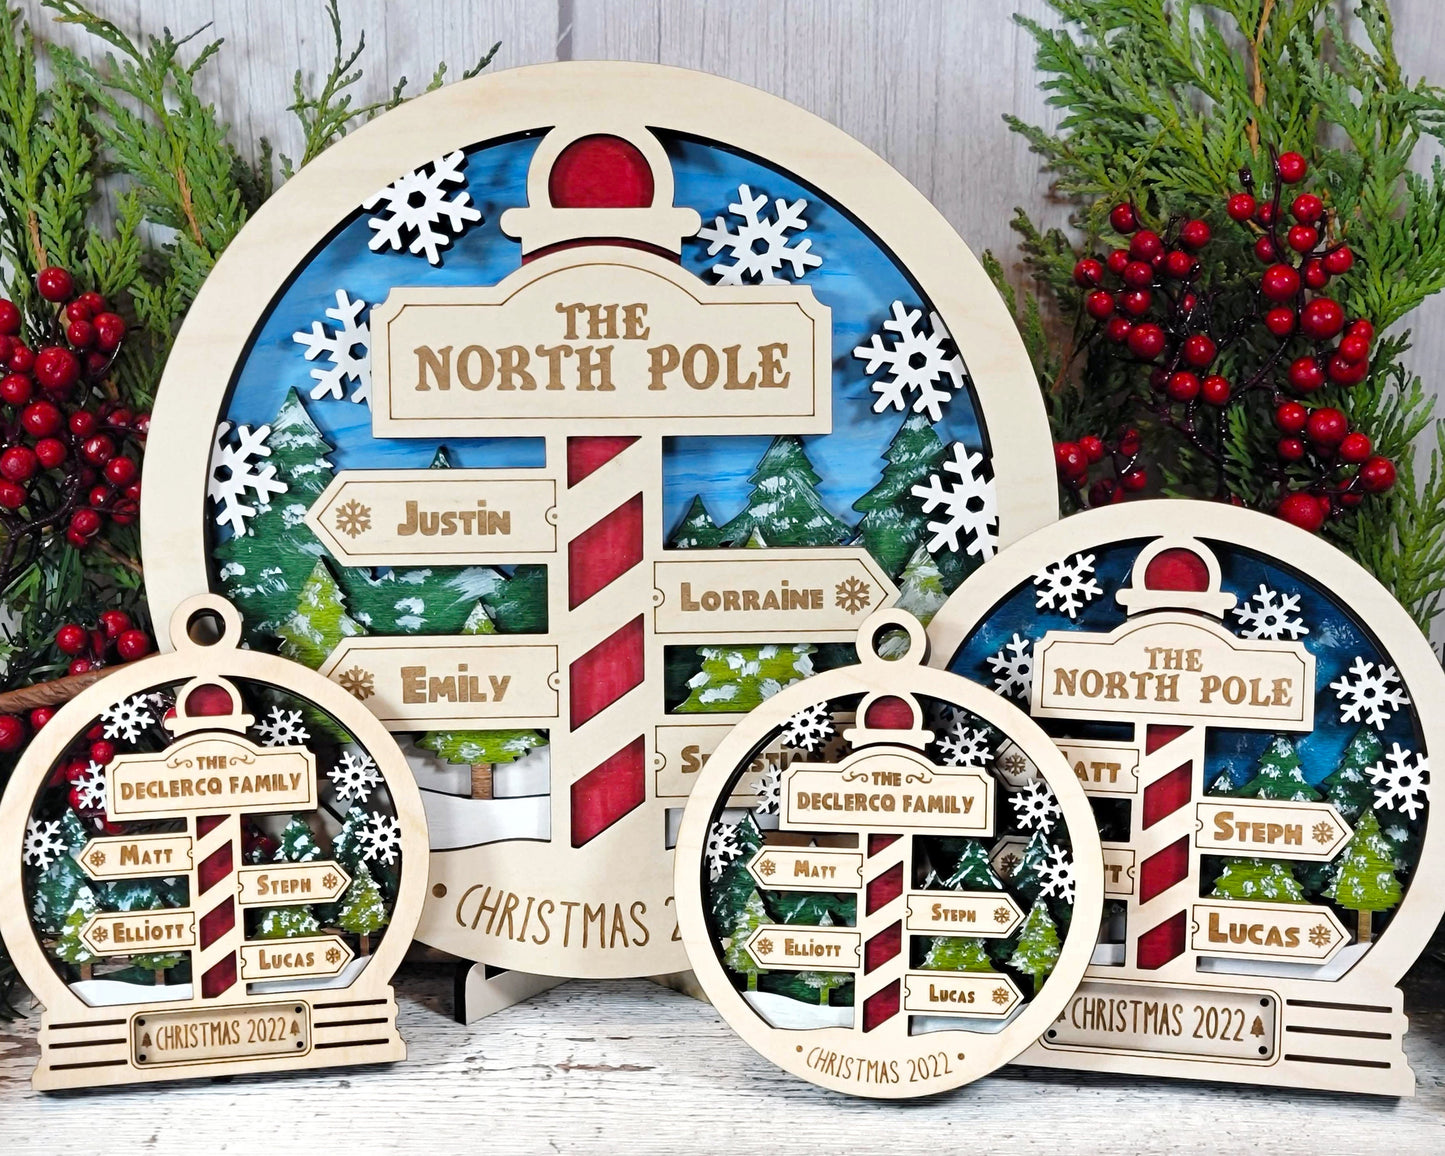 North Pole Family Bundle - 2 Ornaments & 2 Signs Included - Each Design Fits 2-6 Names  - SVG, PDF, AI File Download - Sized for Glowforge